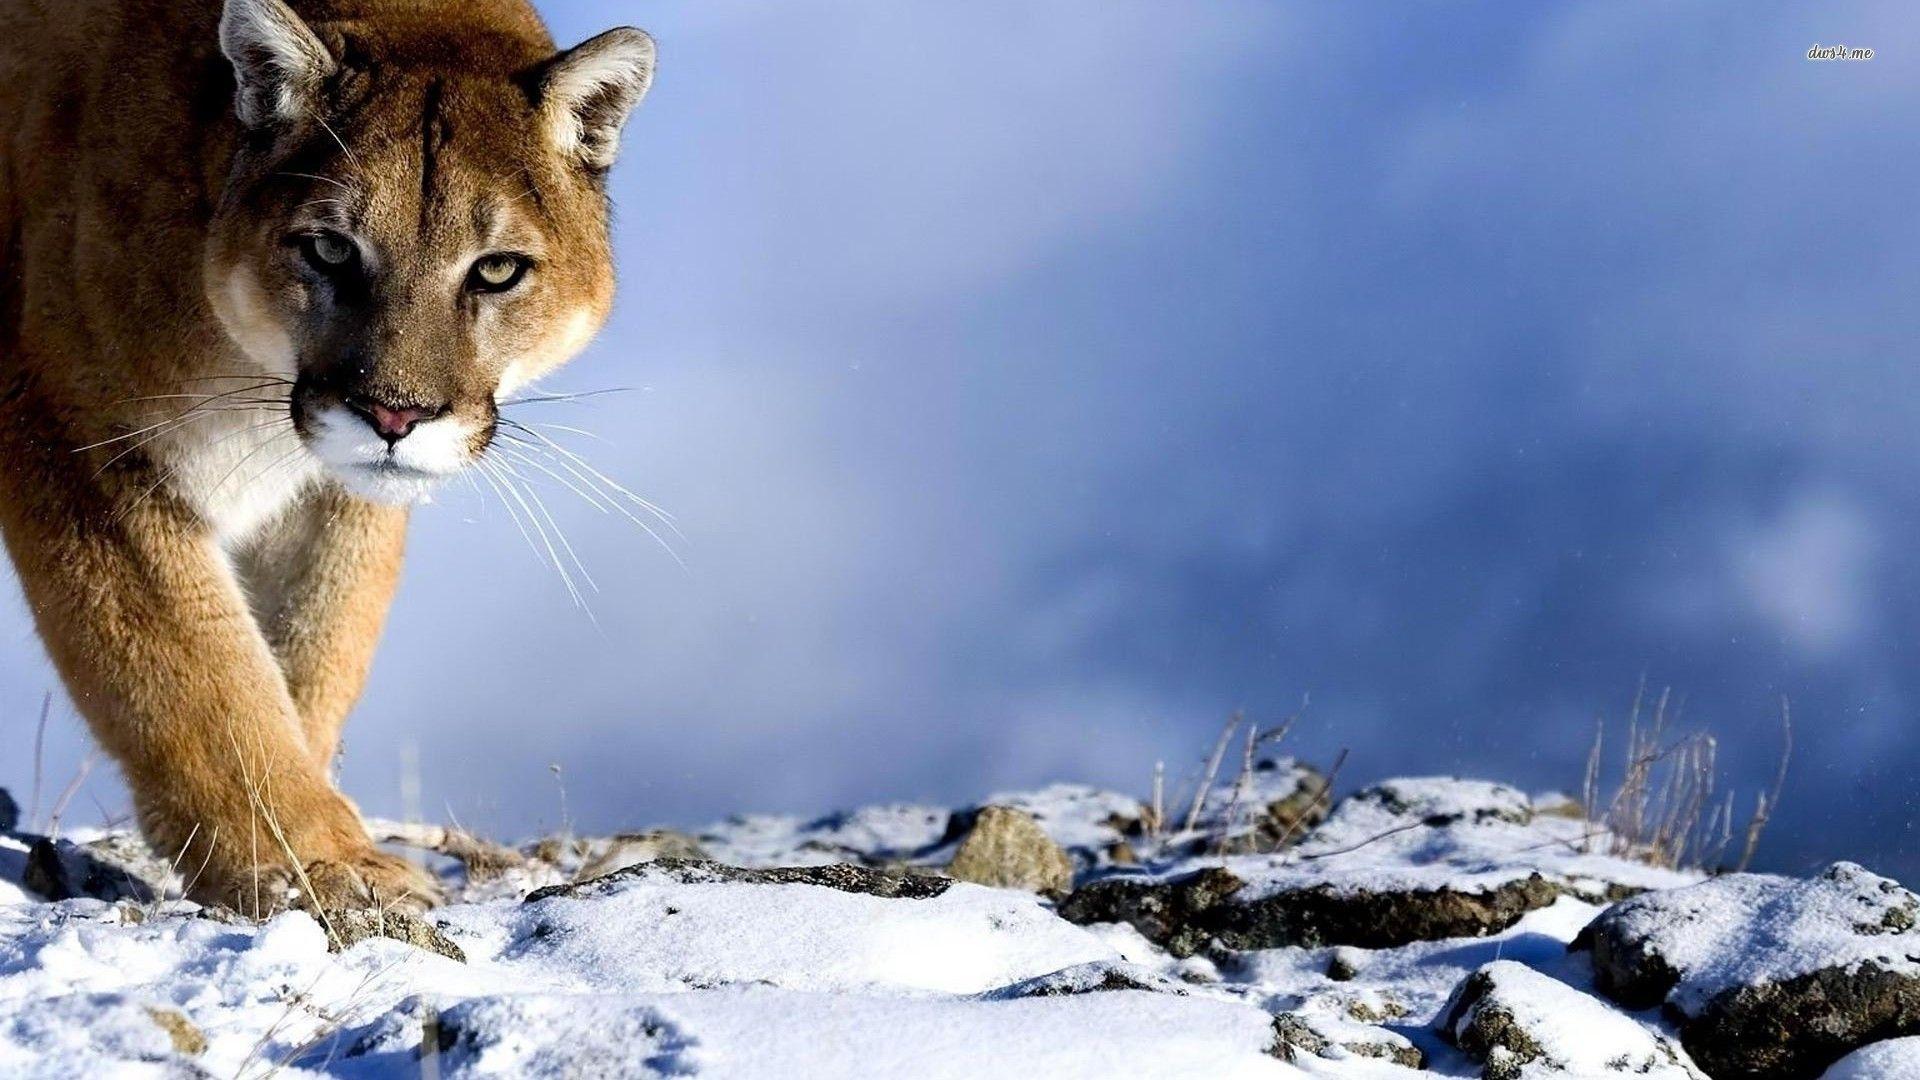 Cougar Wallpaper On The Desktop Background A Picture Of A Mountain Lion  Background Image And Wallpaper for Free Download